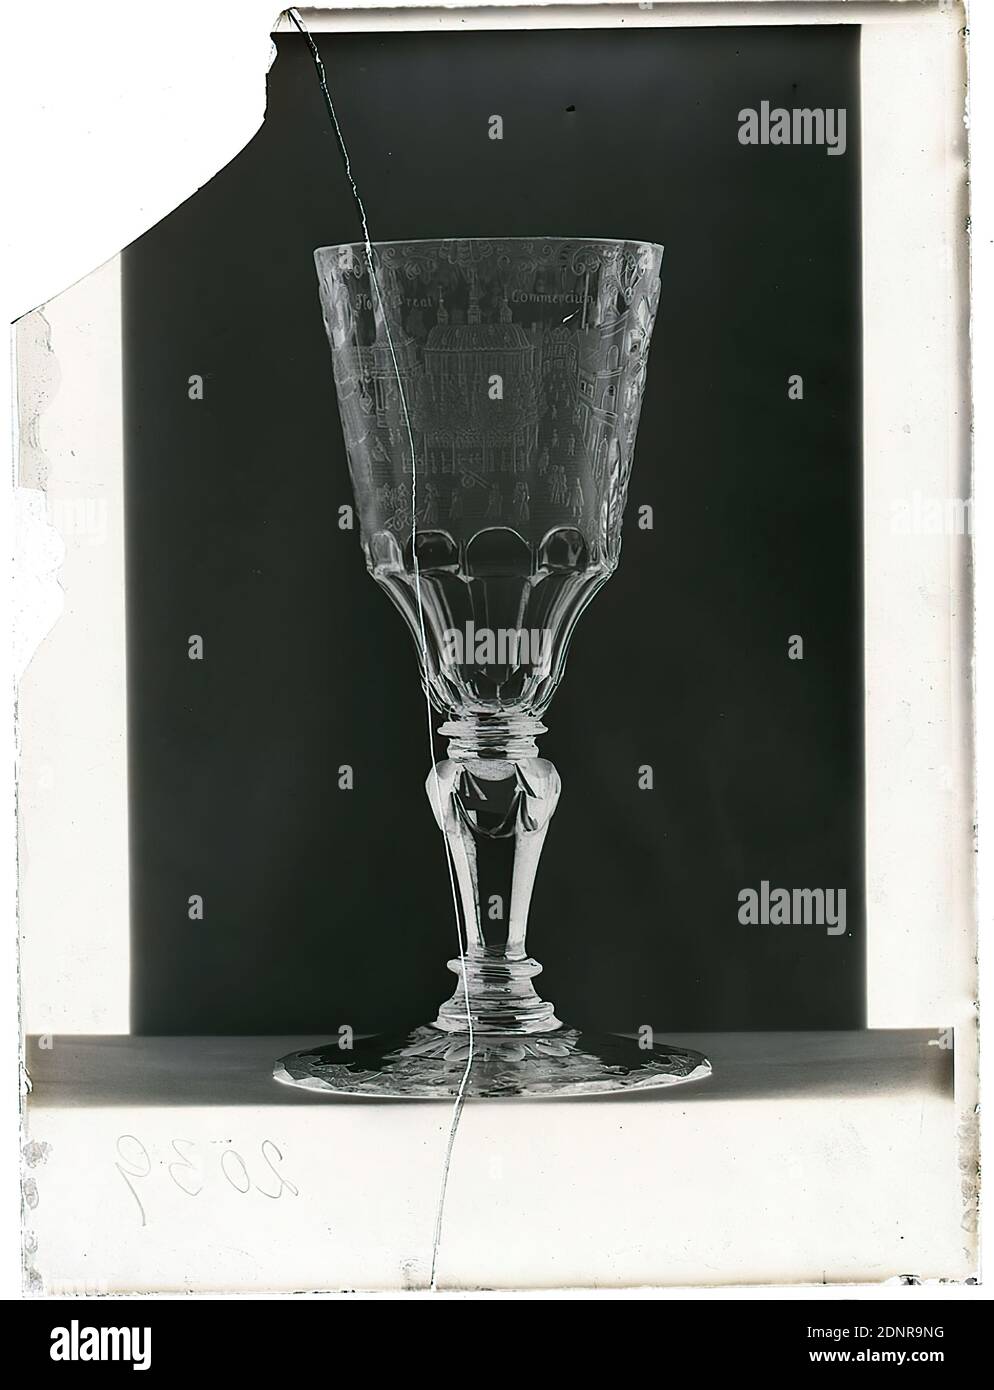 Wilhelm Weimar, goblet, glass negative, black and white negative process, total: height: 23,8 cm; width: 17,8 cm, numbered: u. l.: in lead 2039, goblet, work of applied art (glass), hist. Place, town, village, townspeople, city dwellers, trade and finance, ornaments, handicrafts, arts and crafts, industrial design, wine glass, Roman. As a trained engraver and graduate of the School of Arts and Crafts Stock Photo